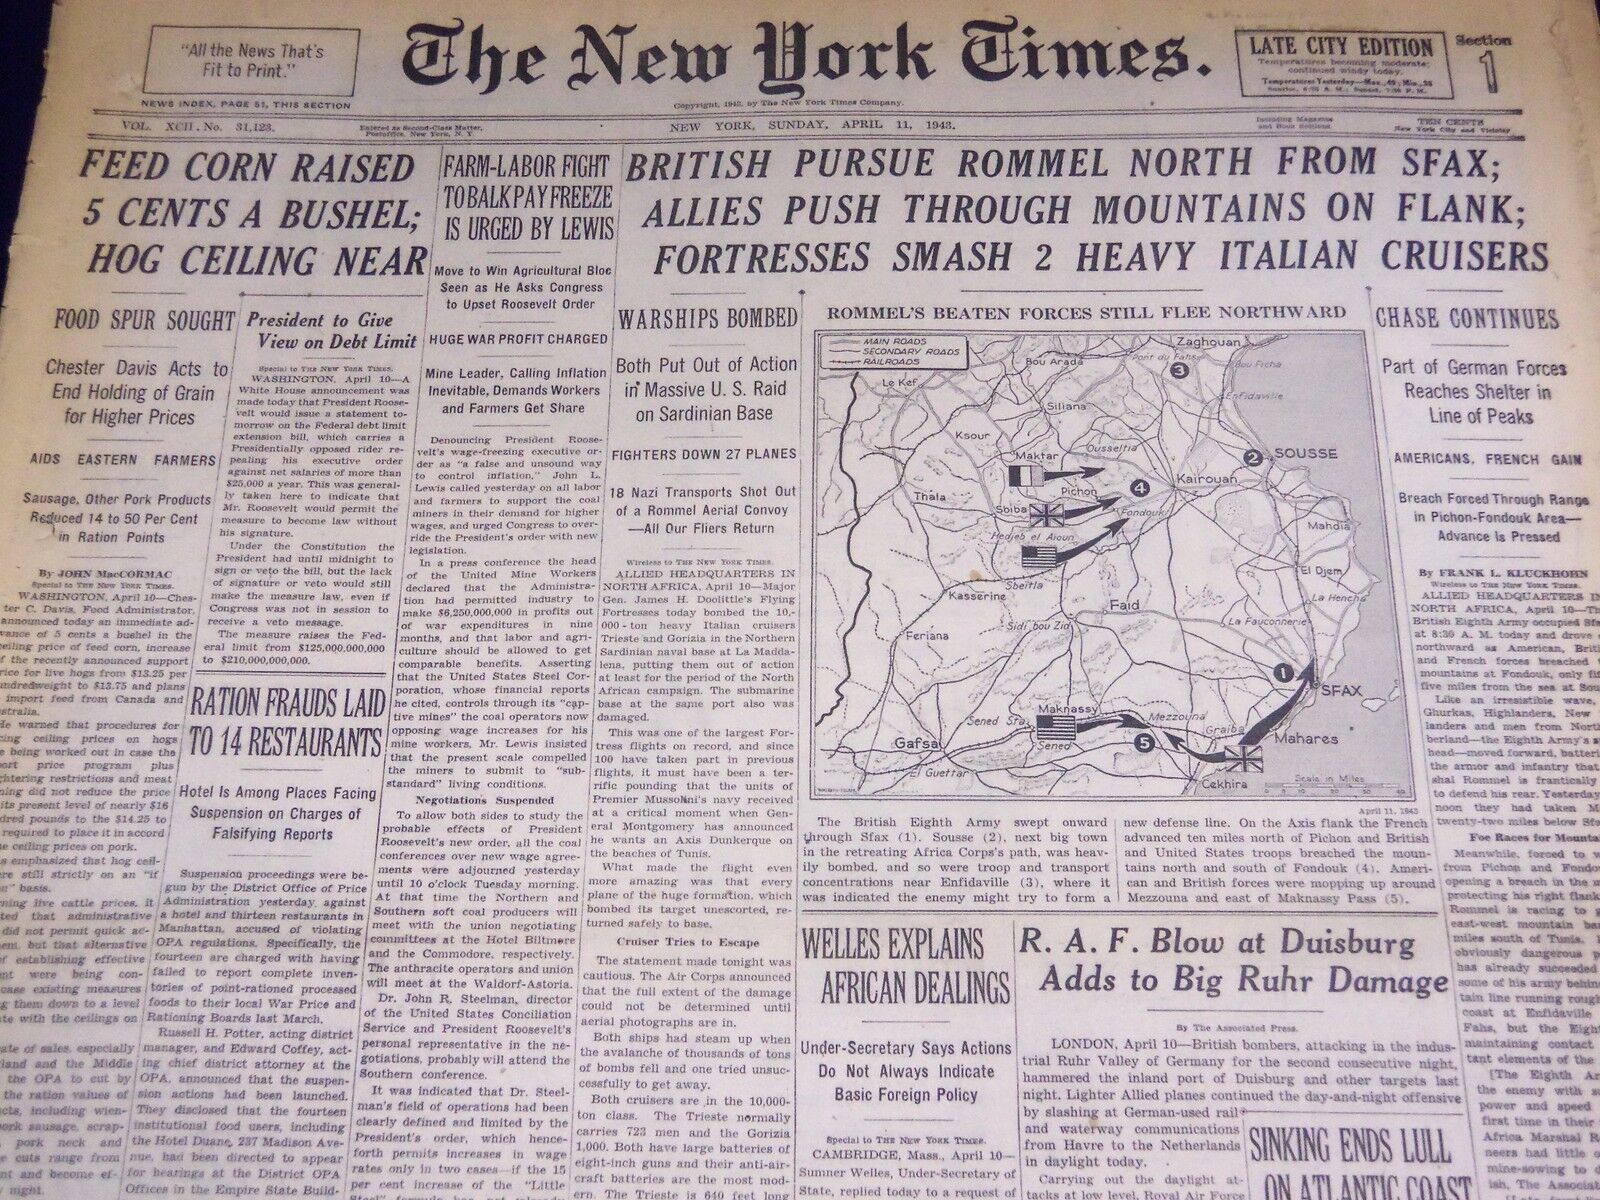 1943 APRIL 11 NEW YORK TIMES - BRITISH PURSUE ROMMEL NORTH FROM SFAX - NT 2143